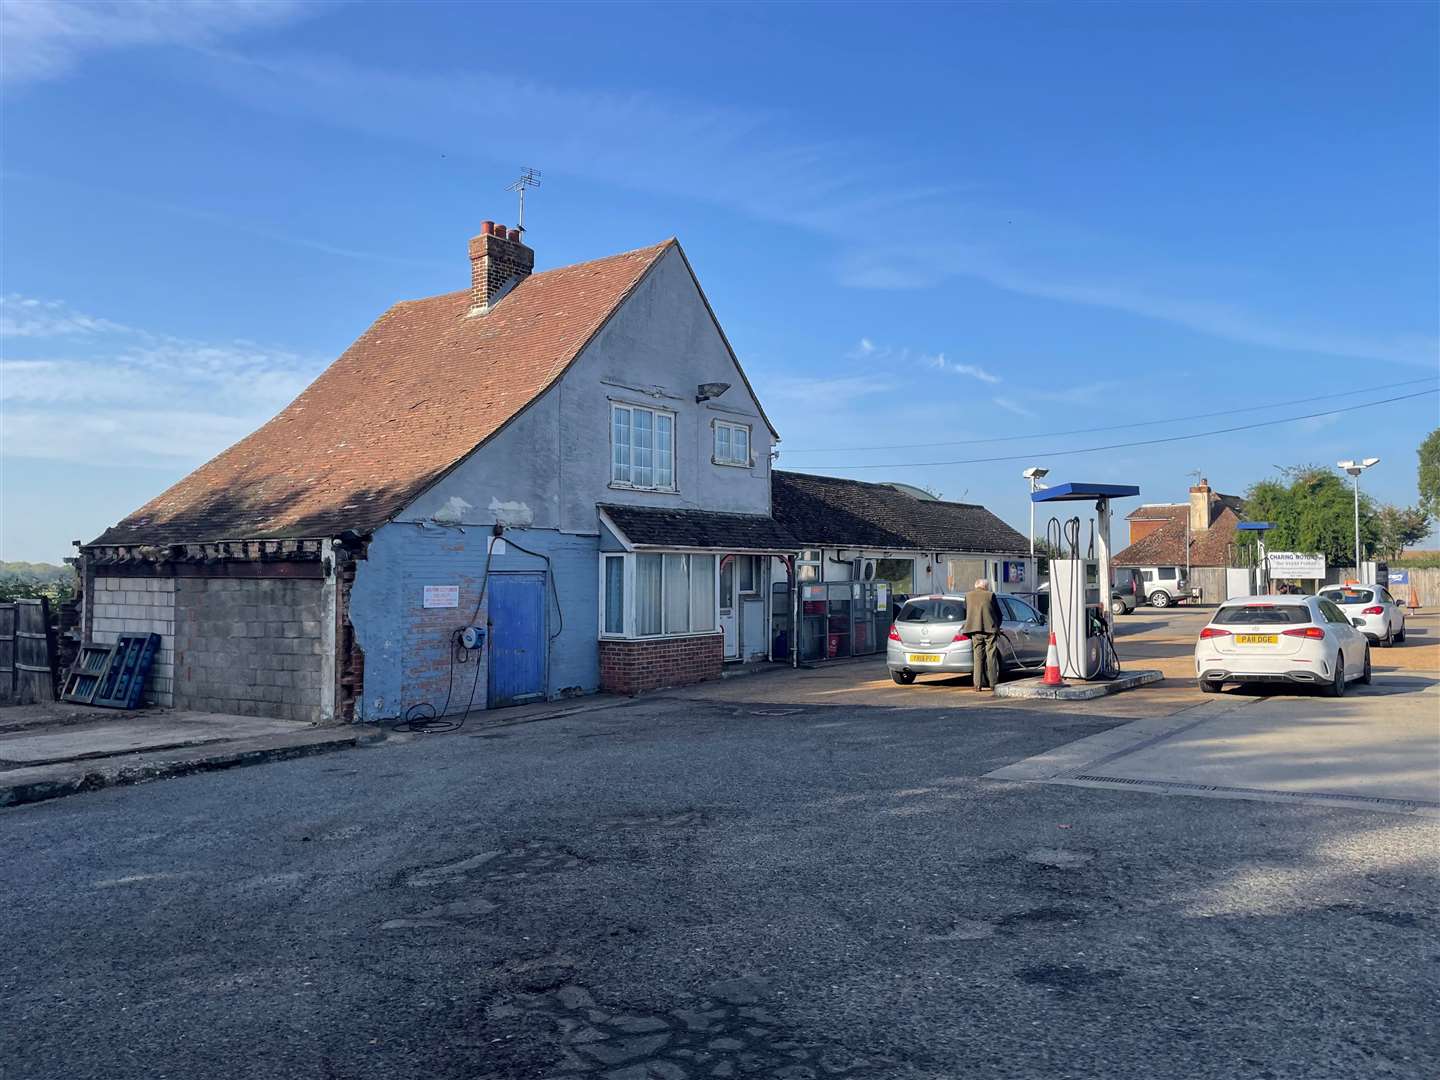 Plans to knock down the Gulf petrol station on Maidstone Road in Charing, have emerged